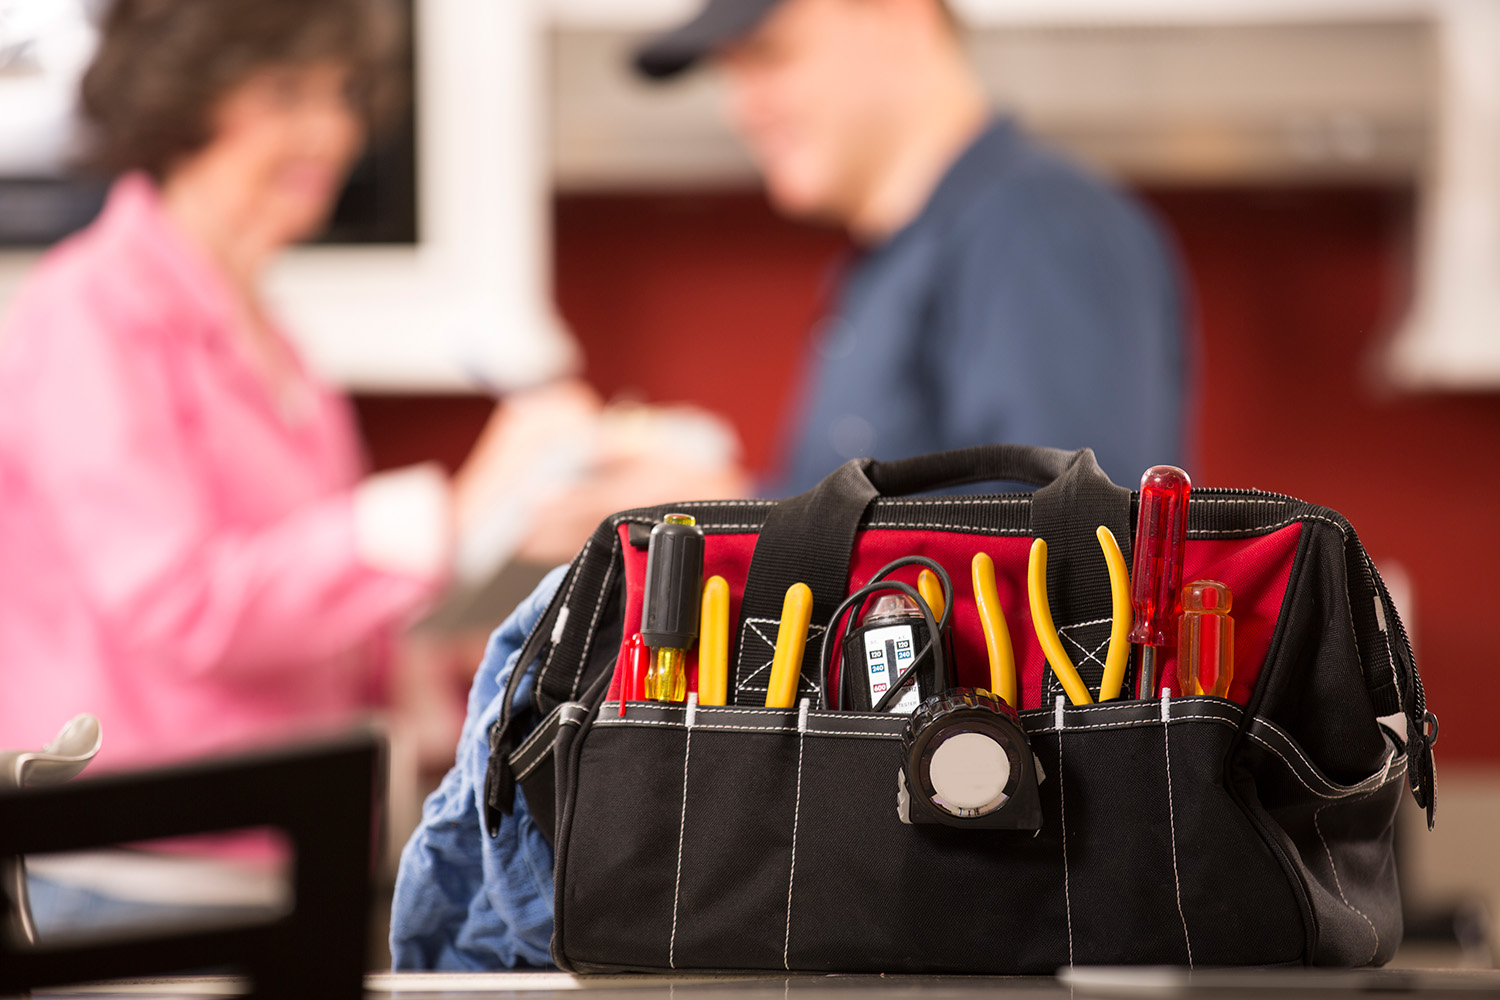 A tool bag with a technician speaking with a client in the background